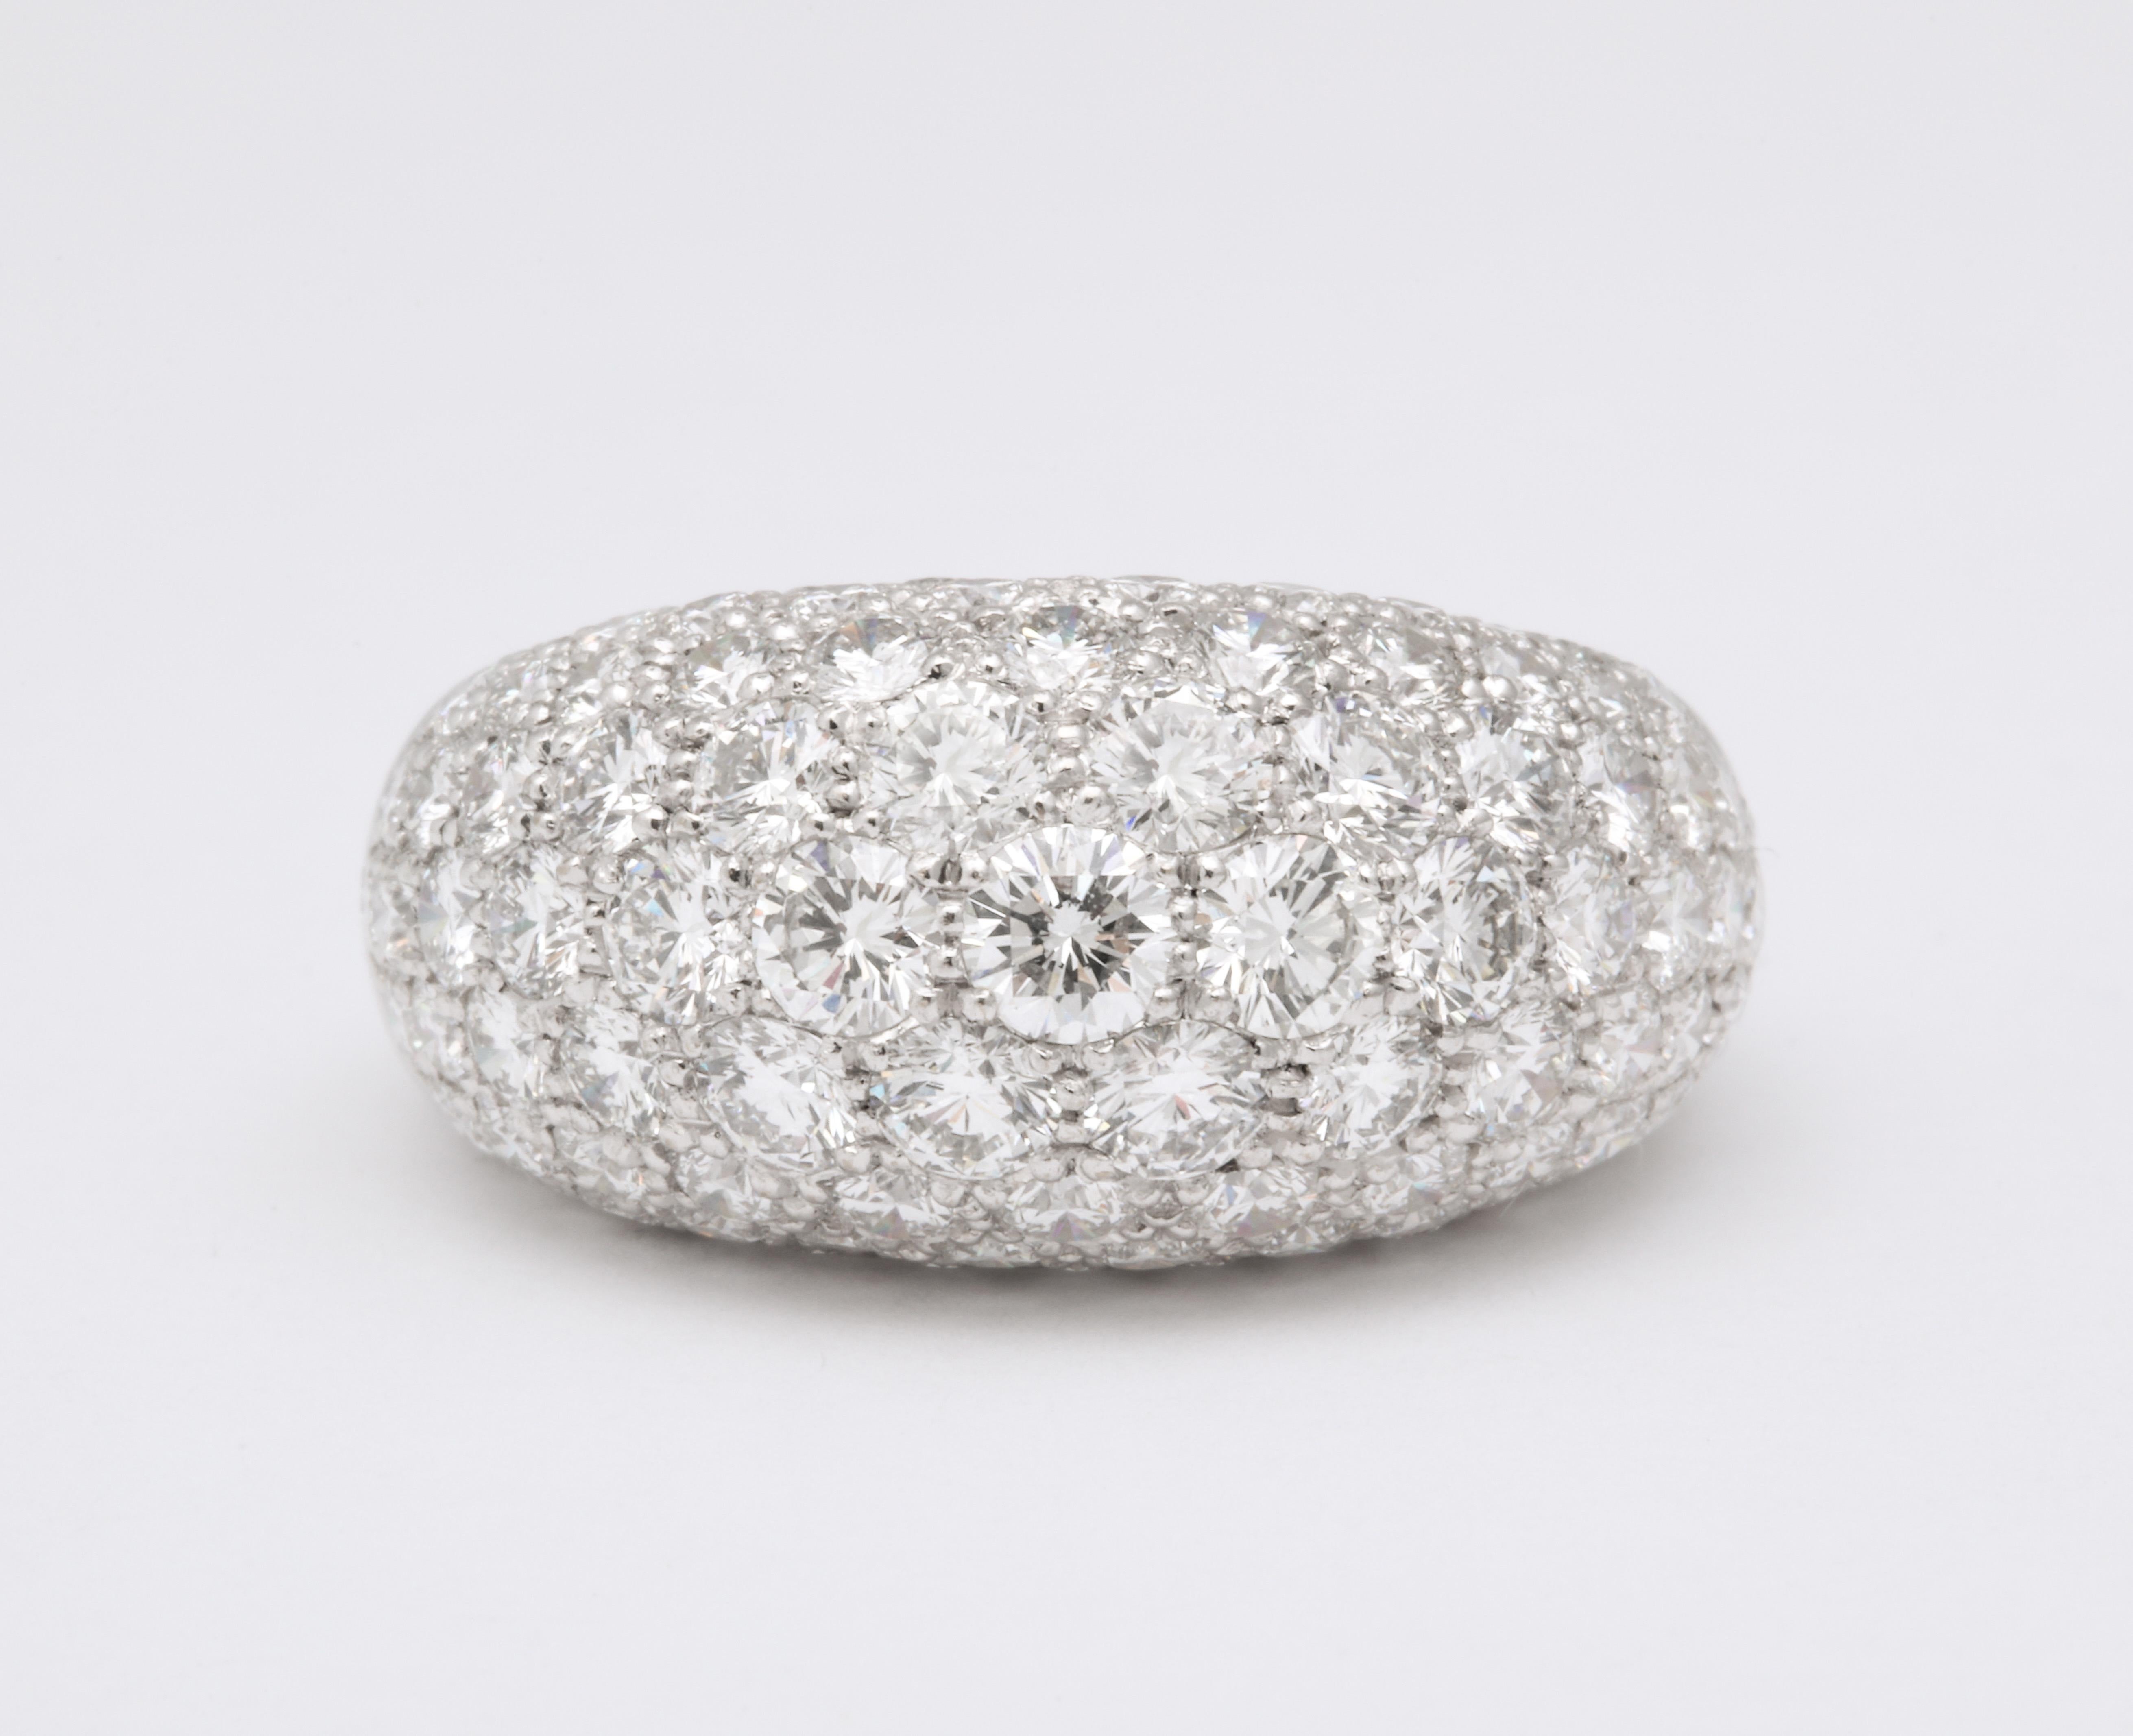 This ring exemplifies exquisite simplicity from one of France's leading 